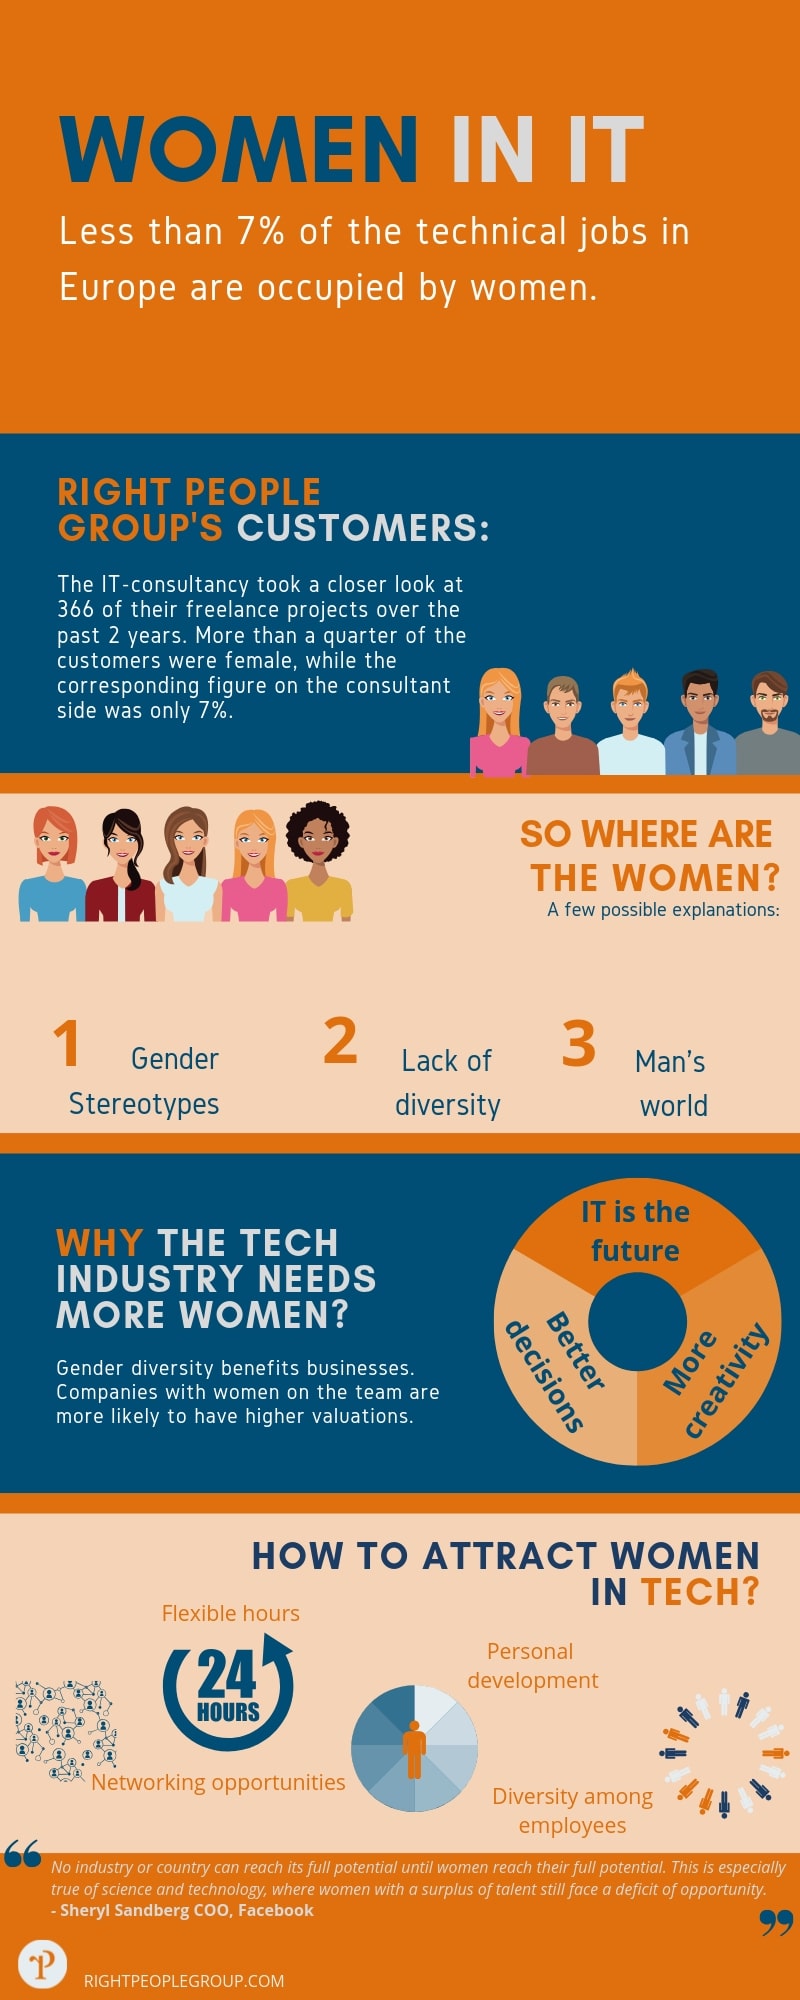 Why are there so few women working in tech?